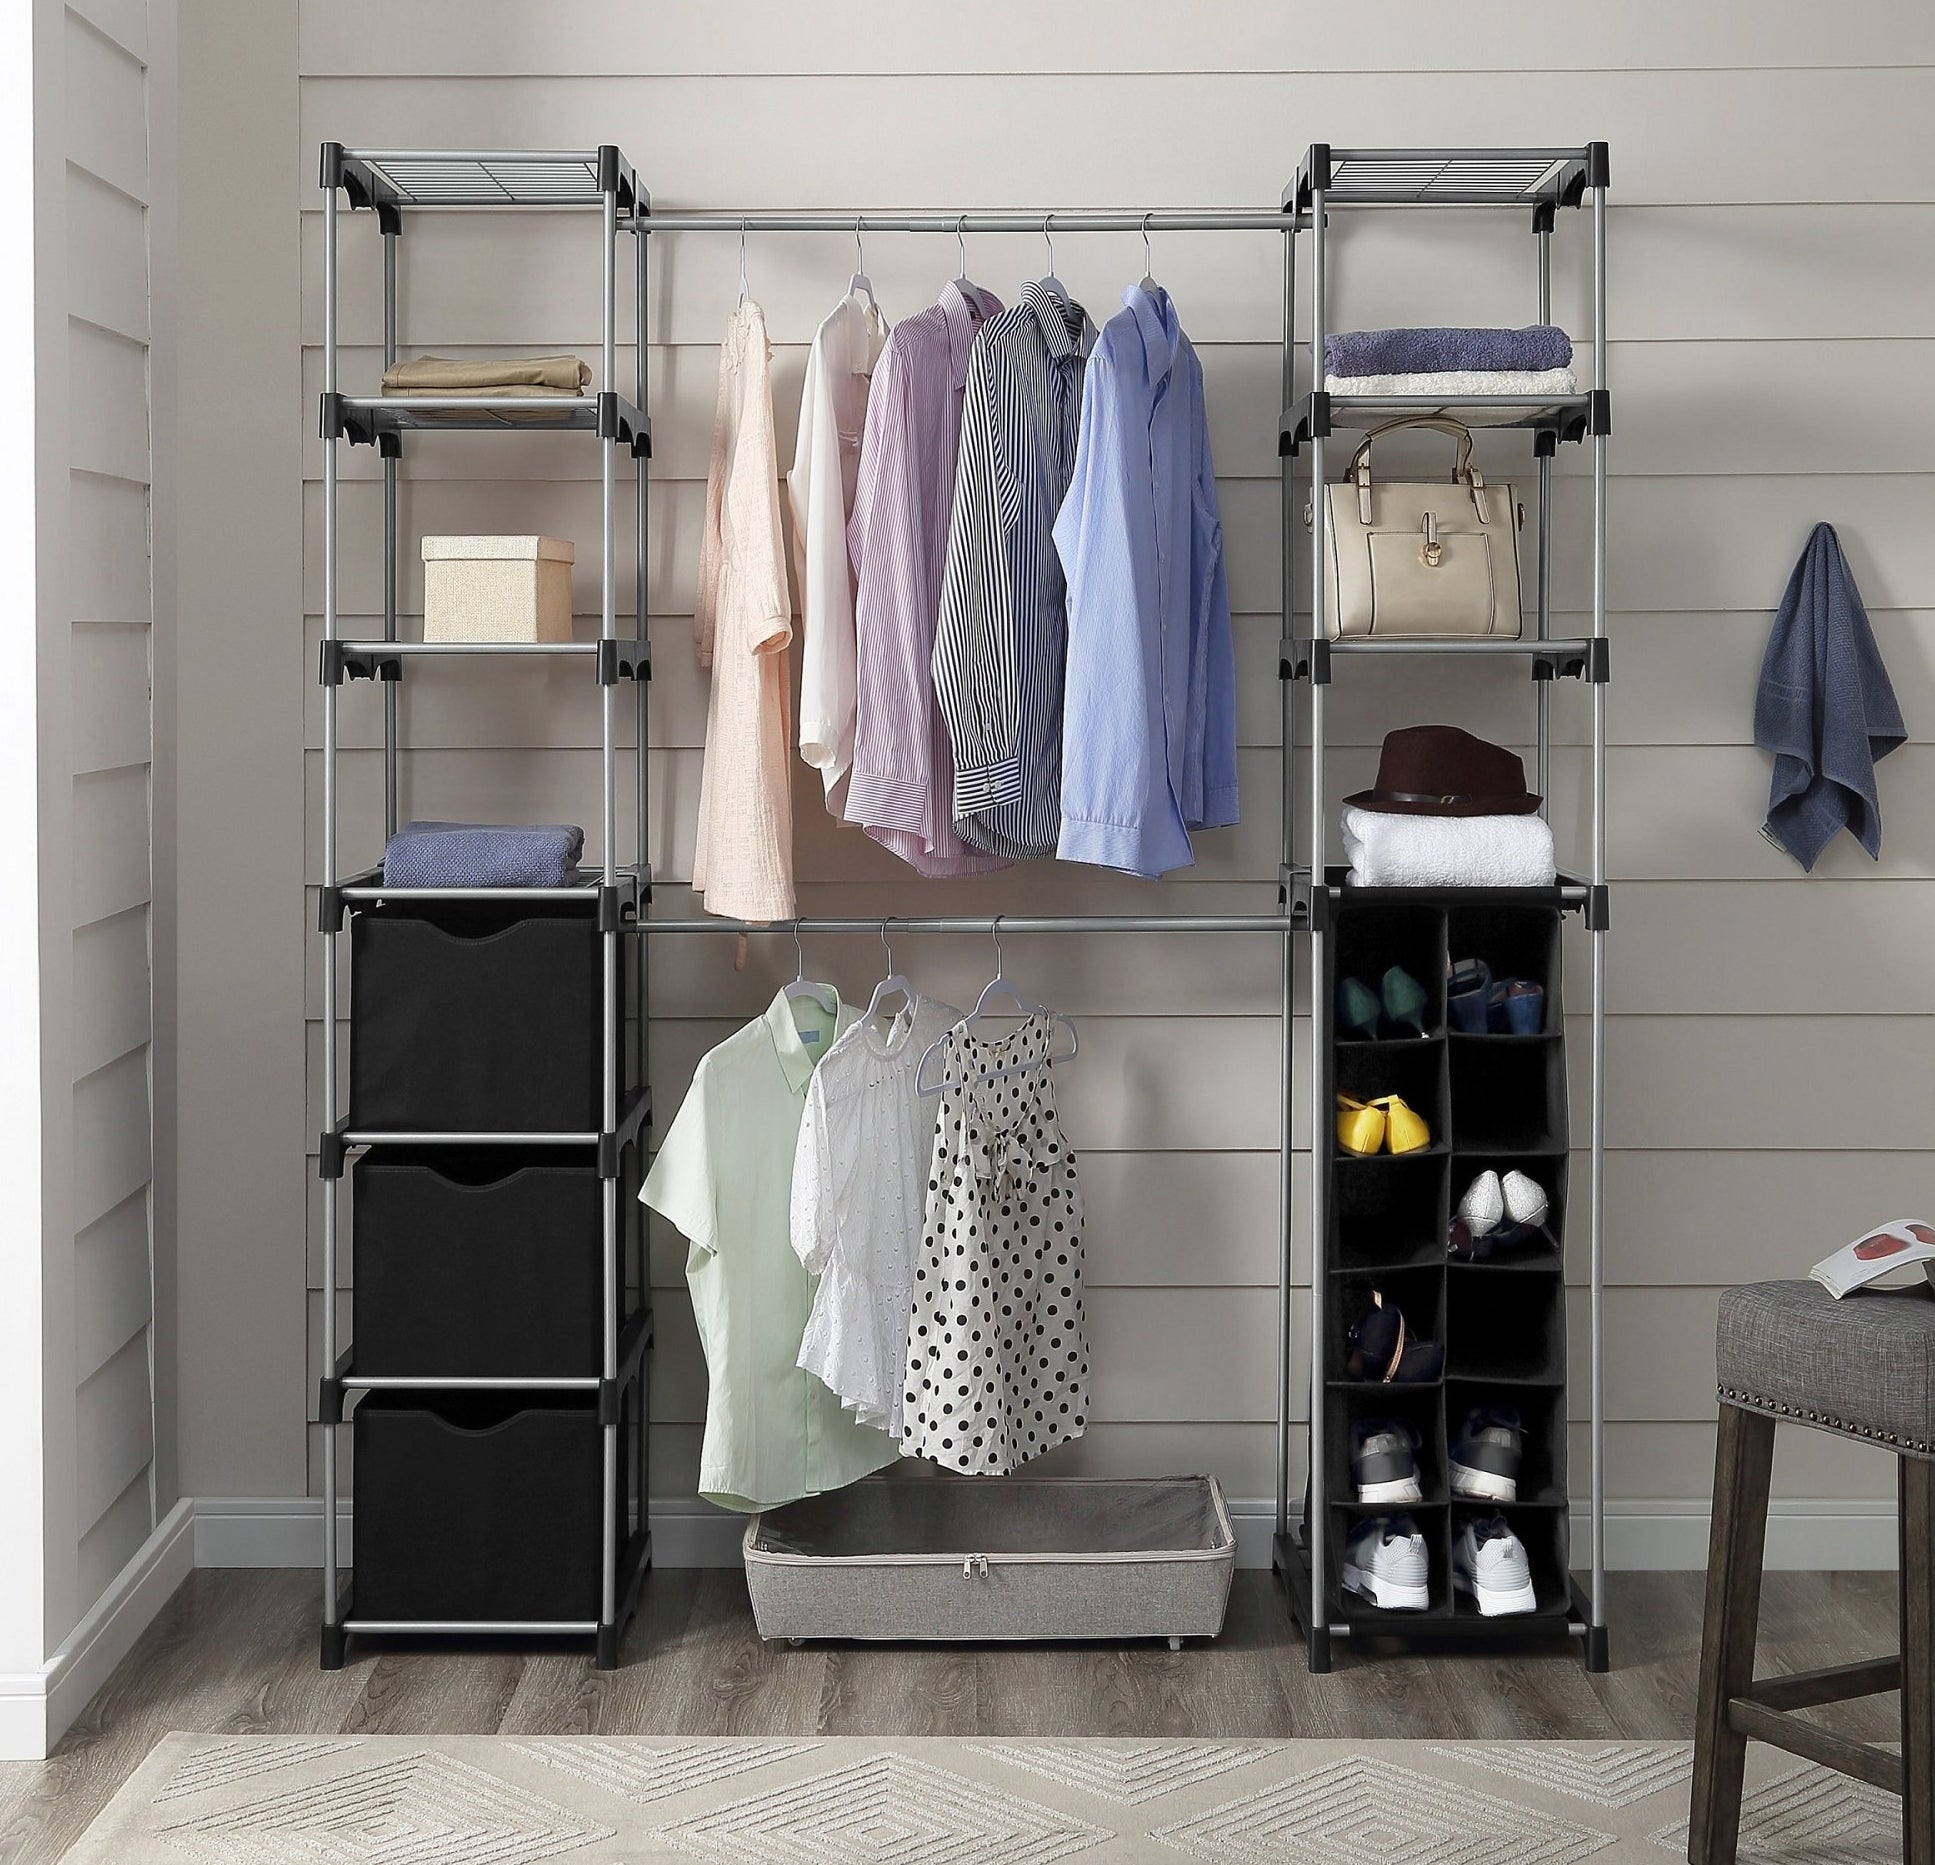 The closet system with shoes, clothes, and accessories